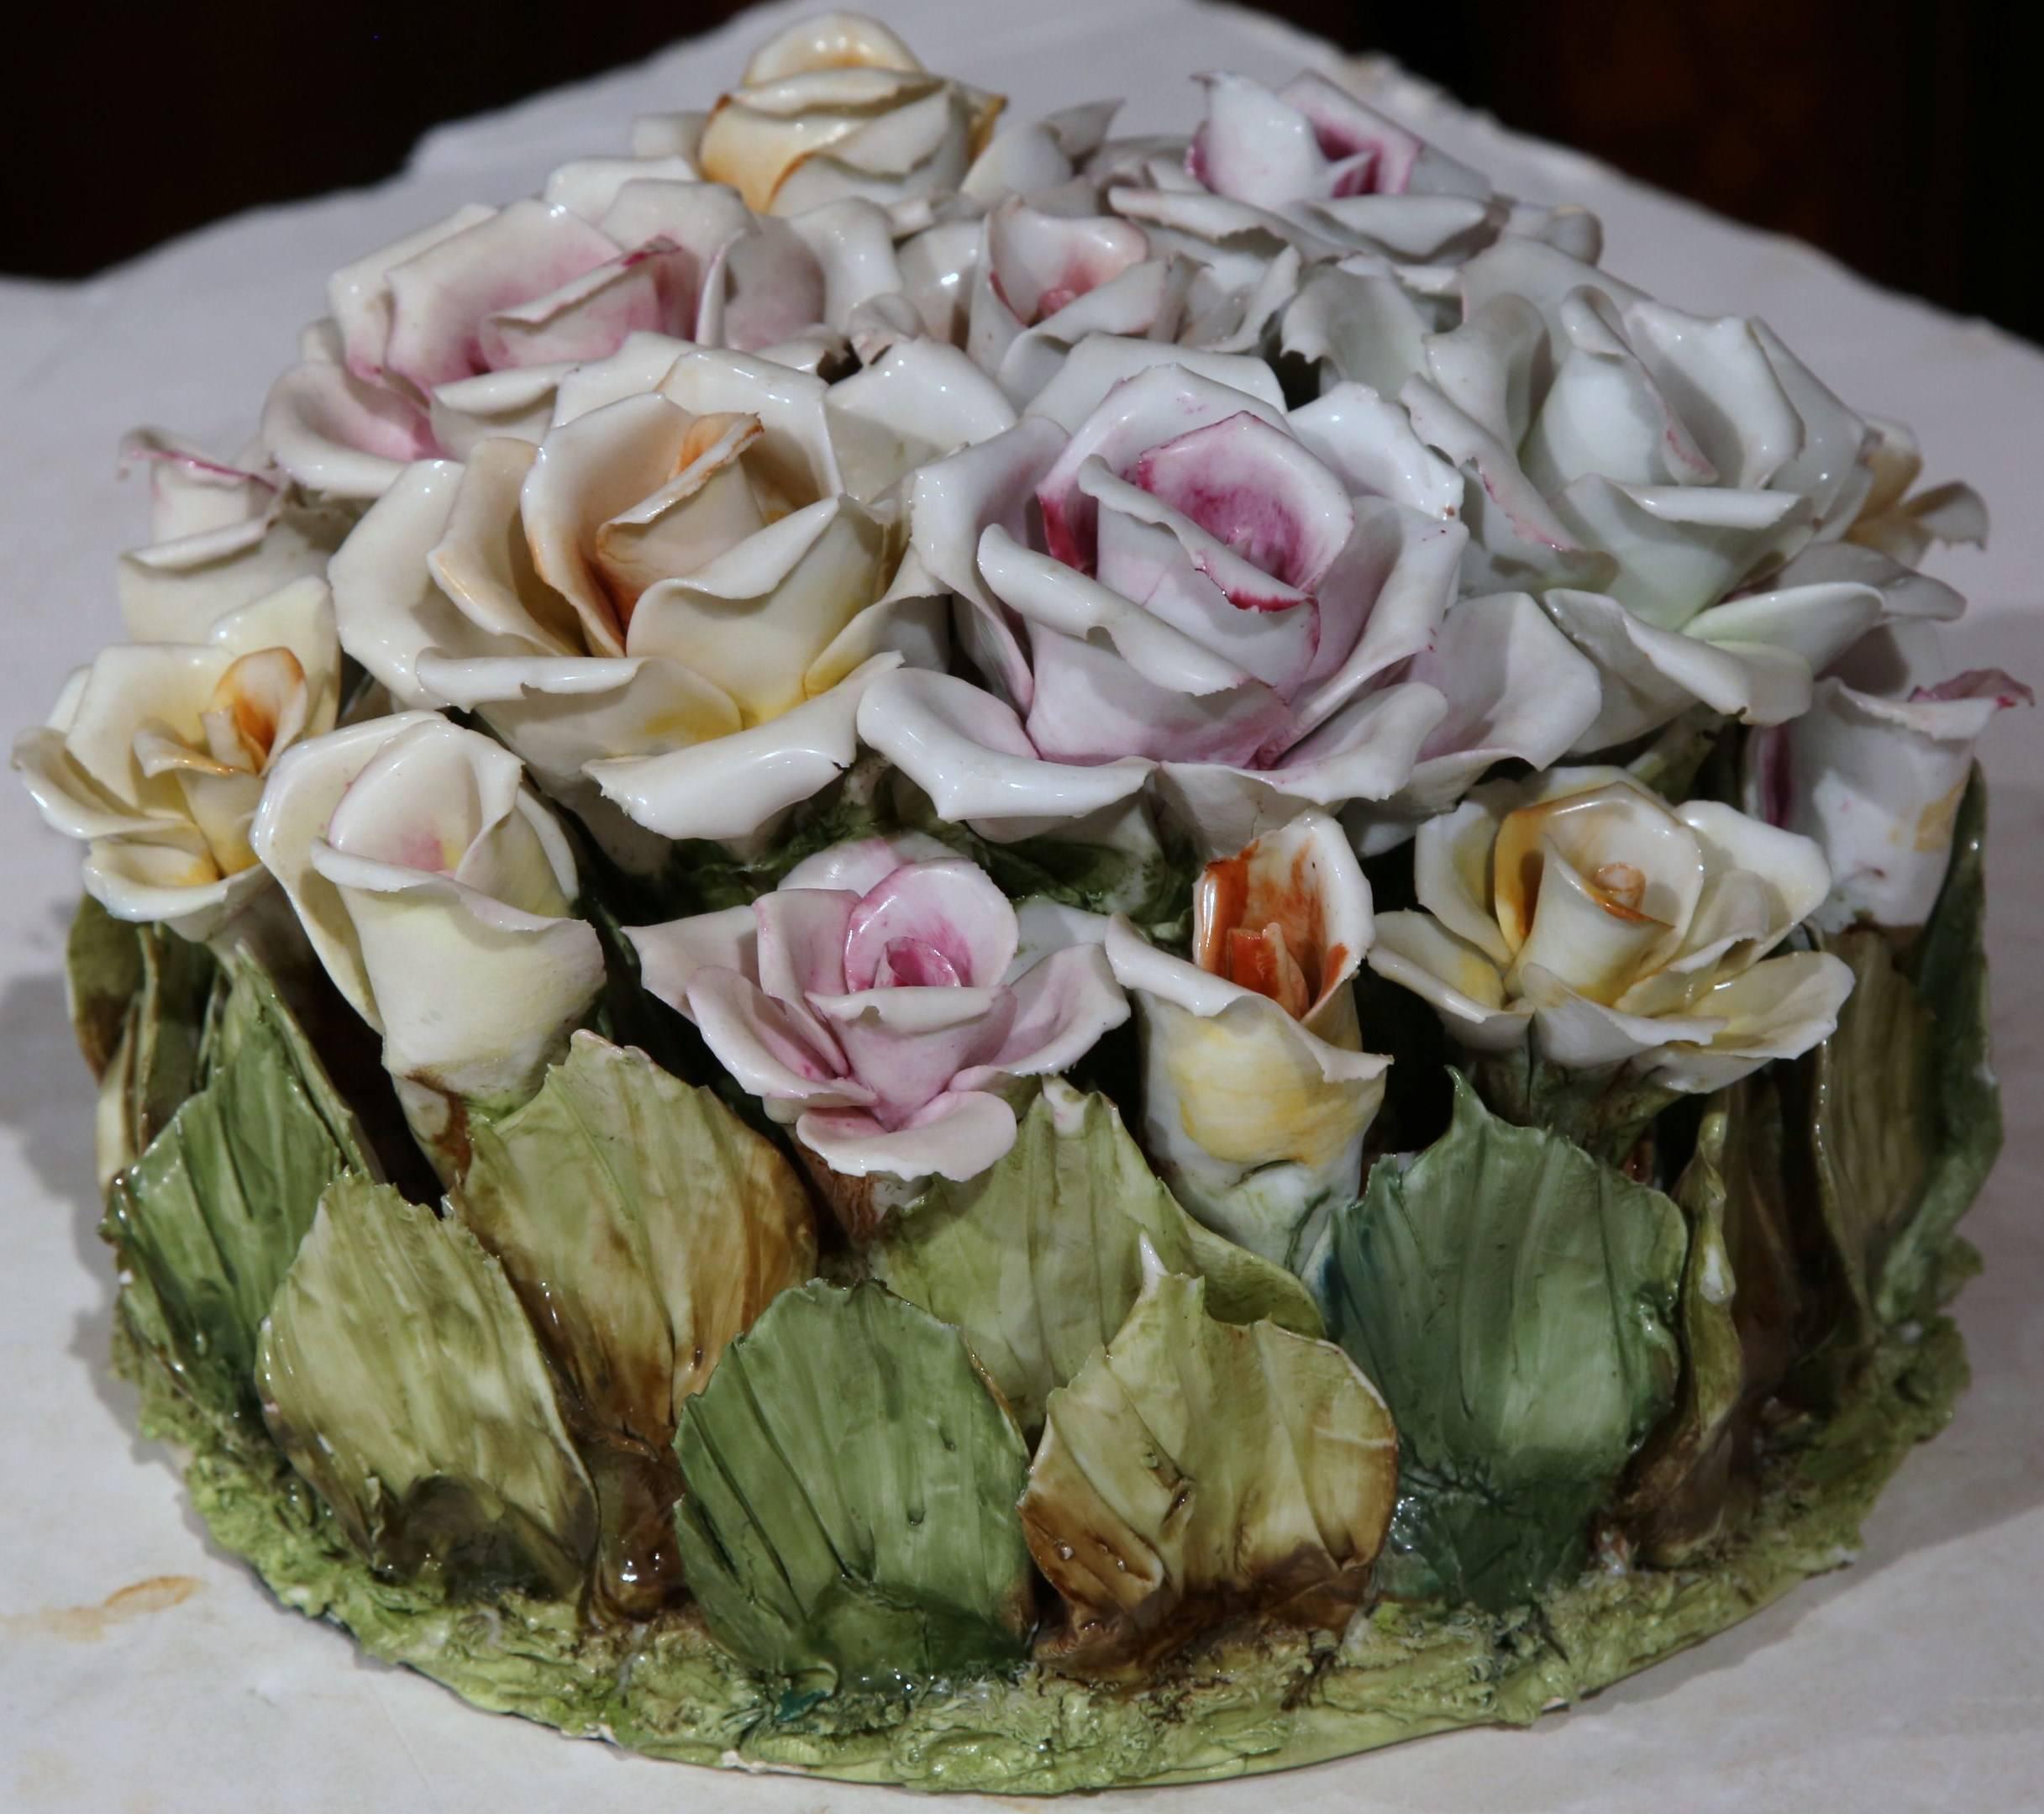 Decorate a tabletop with this circular, Majolica roses basket from France, circa 1920. The colorful piece has a palette of green, yellow, pink and white and has intricate carvings from every angle. This delicate, beautiful piece is in excellent